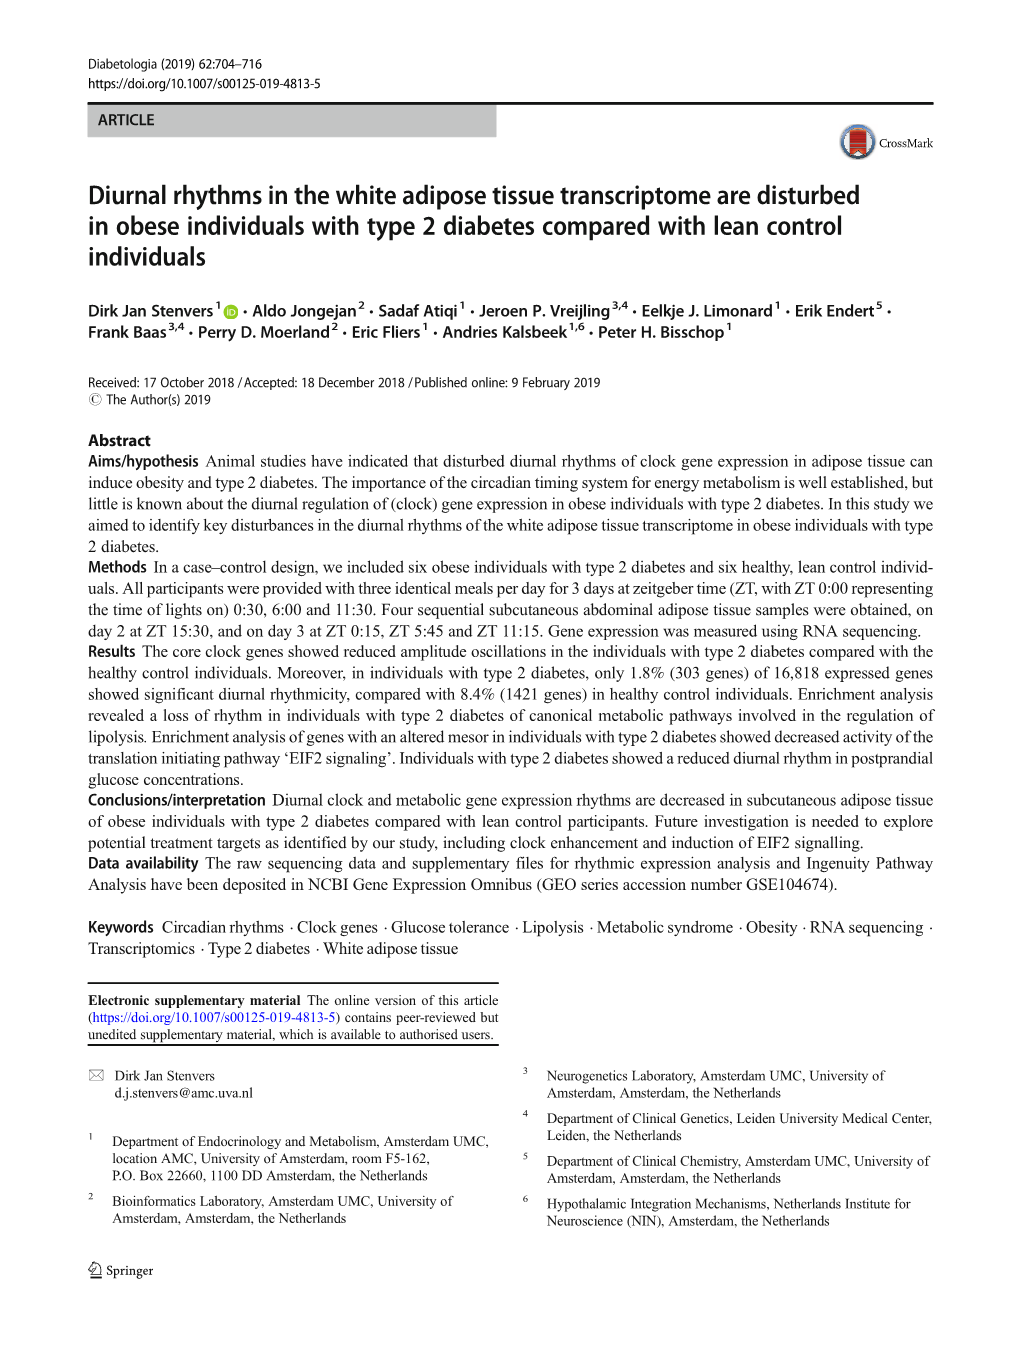 Diurnal Rhythms in the White Adipose Tissue Transcriptome Are Disturbed in Obese Individuals with Type 2 Diabetes Compared with Lean Control Individuals